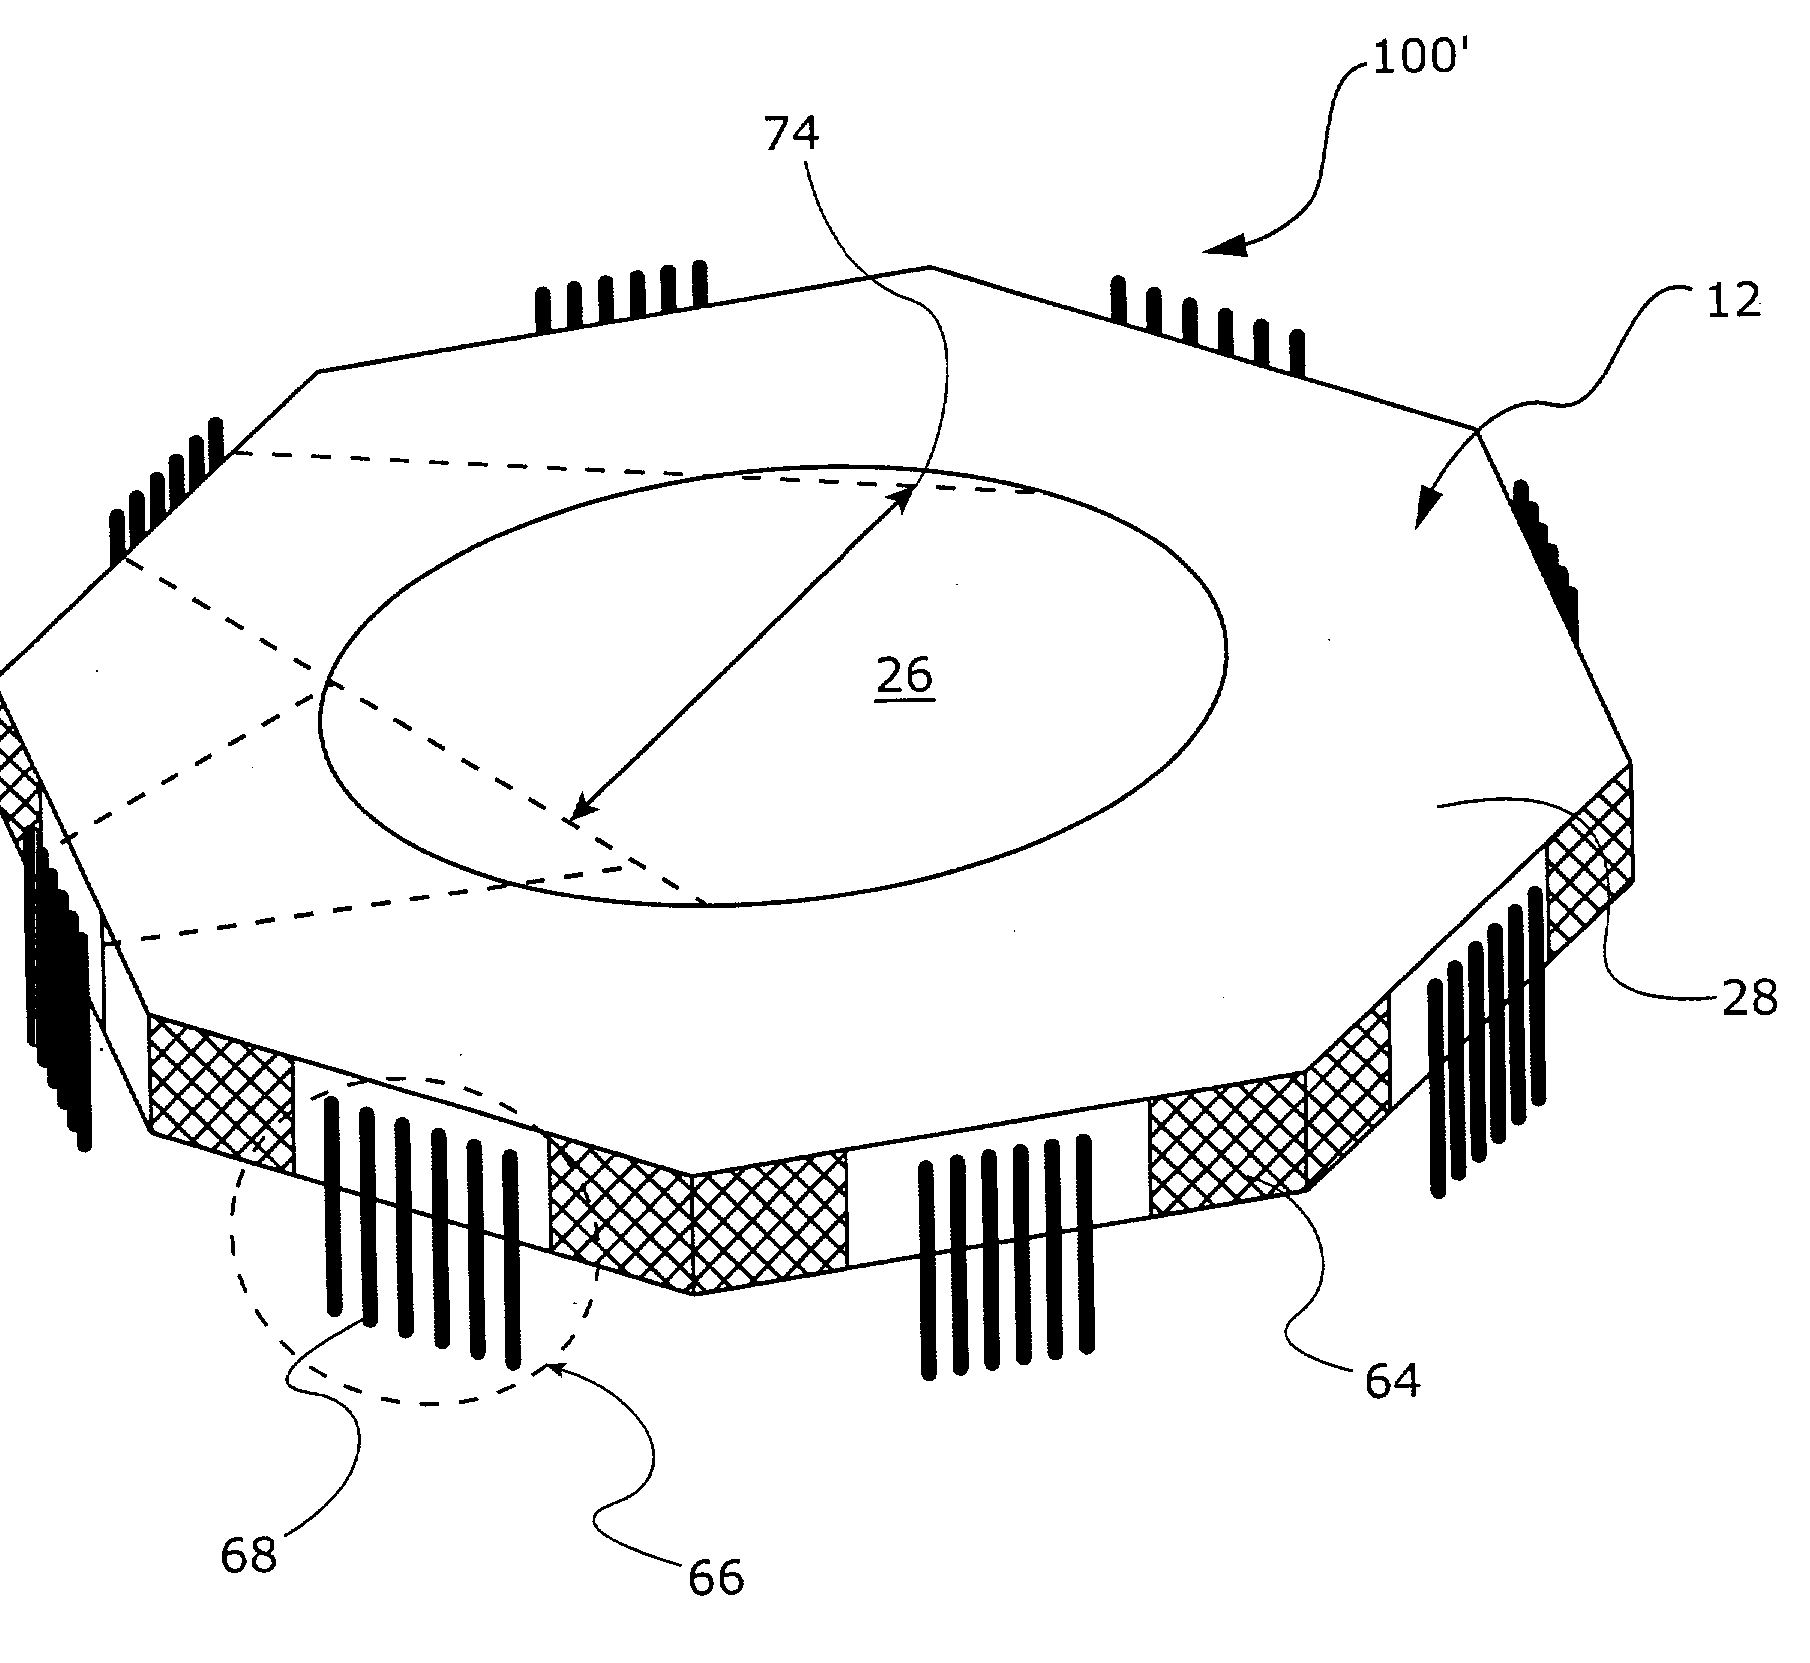 Diode-pumped solid state disk laser and method for producing uniform laser gain